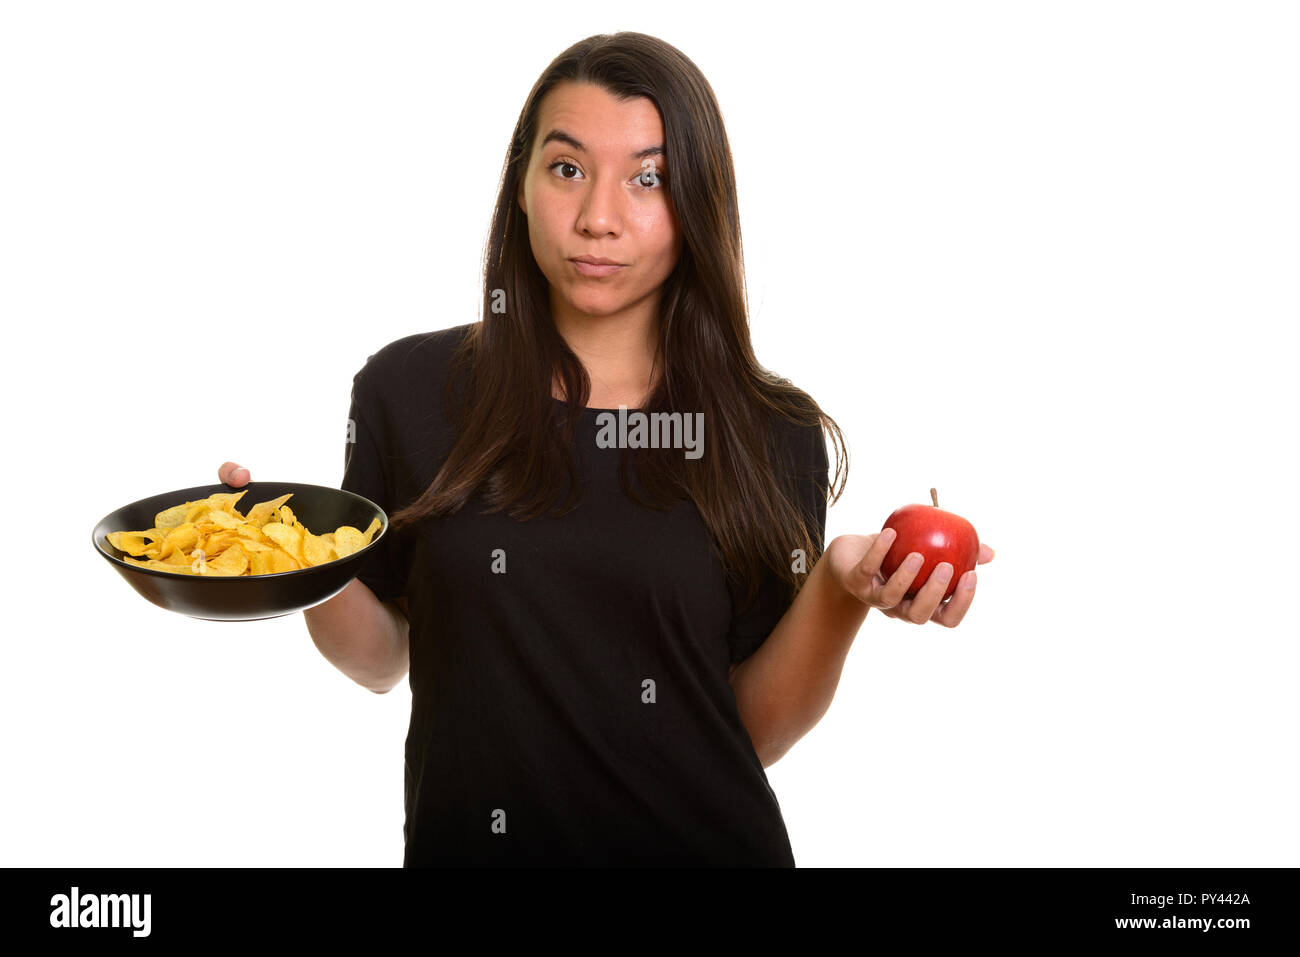 Young Caucasian woman holding bowl of potato chips and red apple Stock Photo